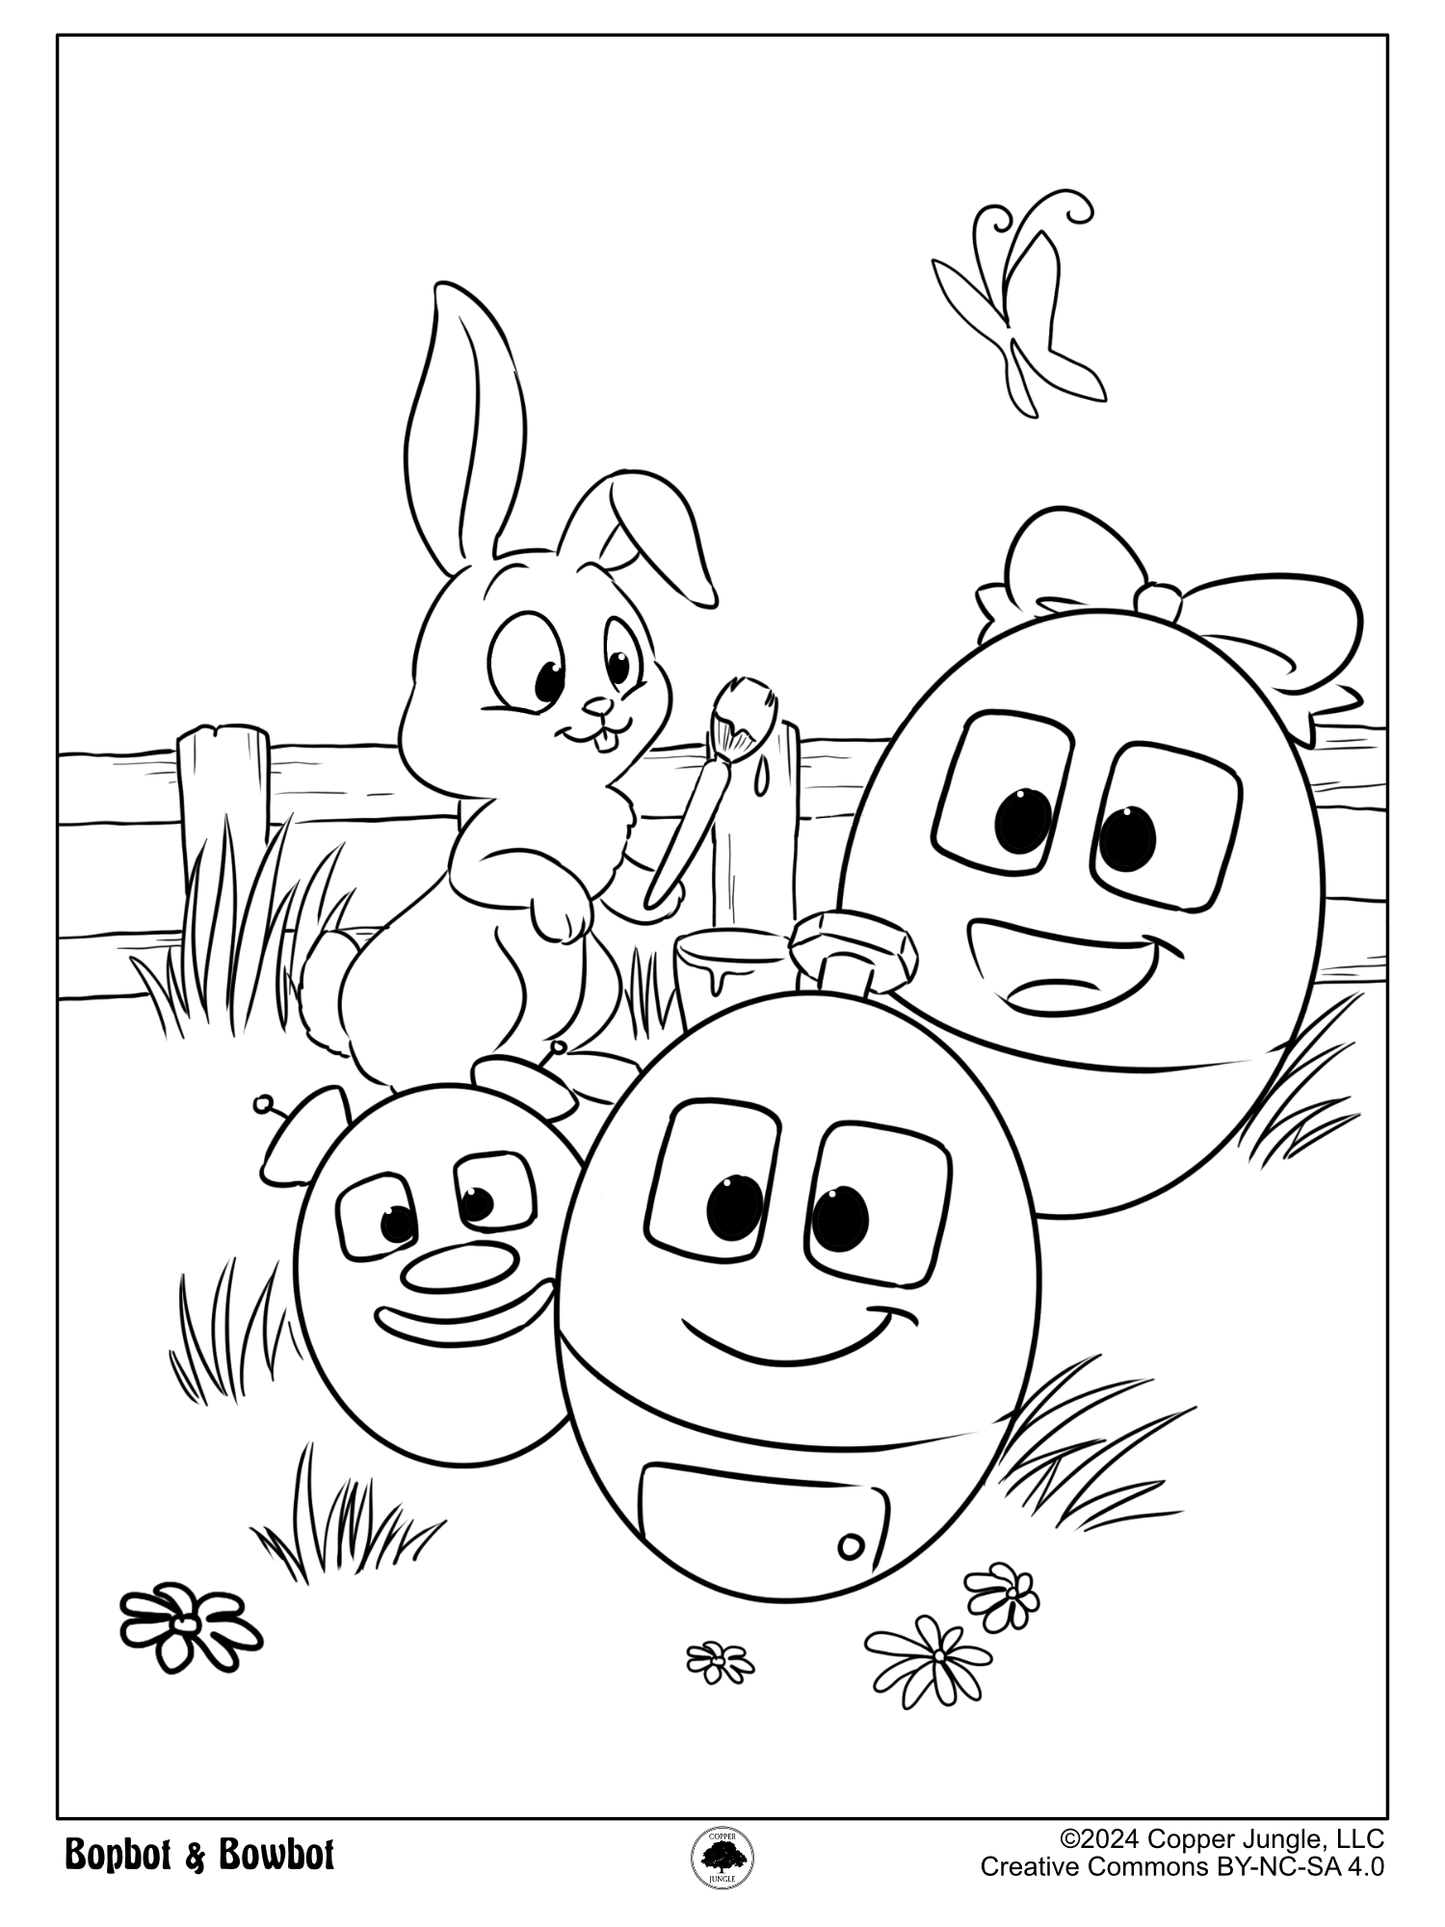 Bopbot & Bowbot Easter Eggs Coloring Page